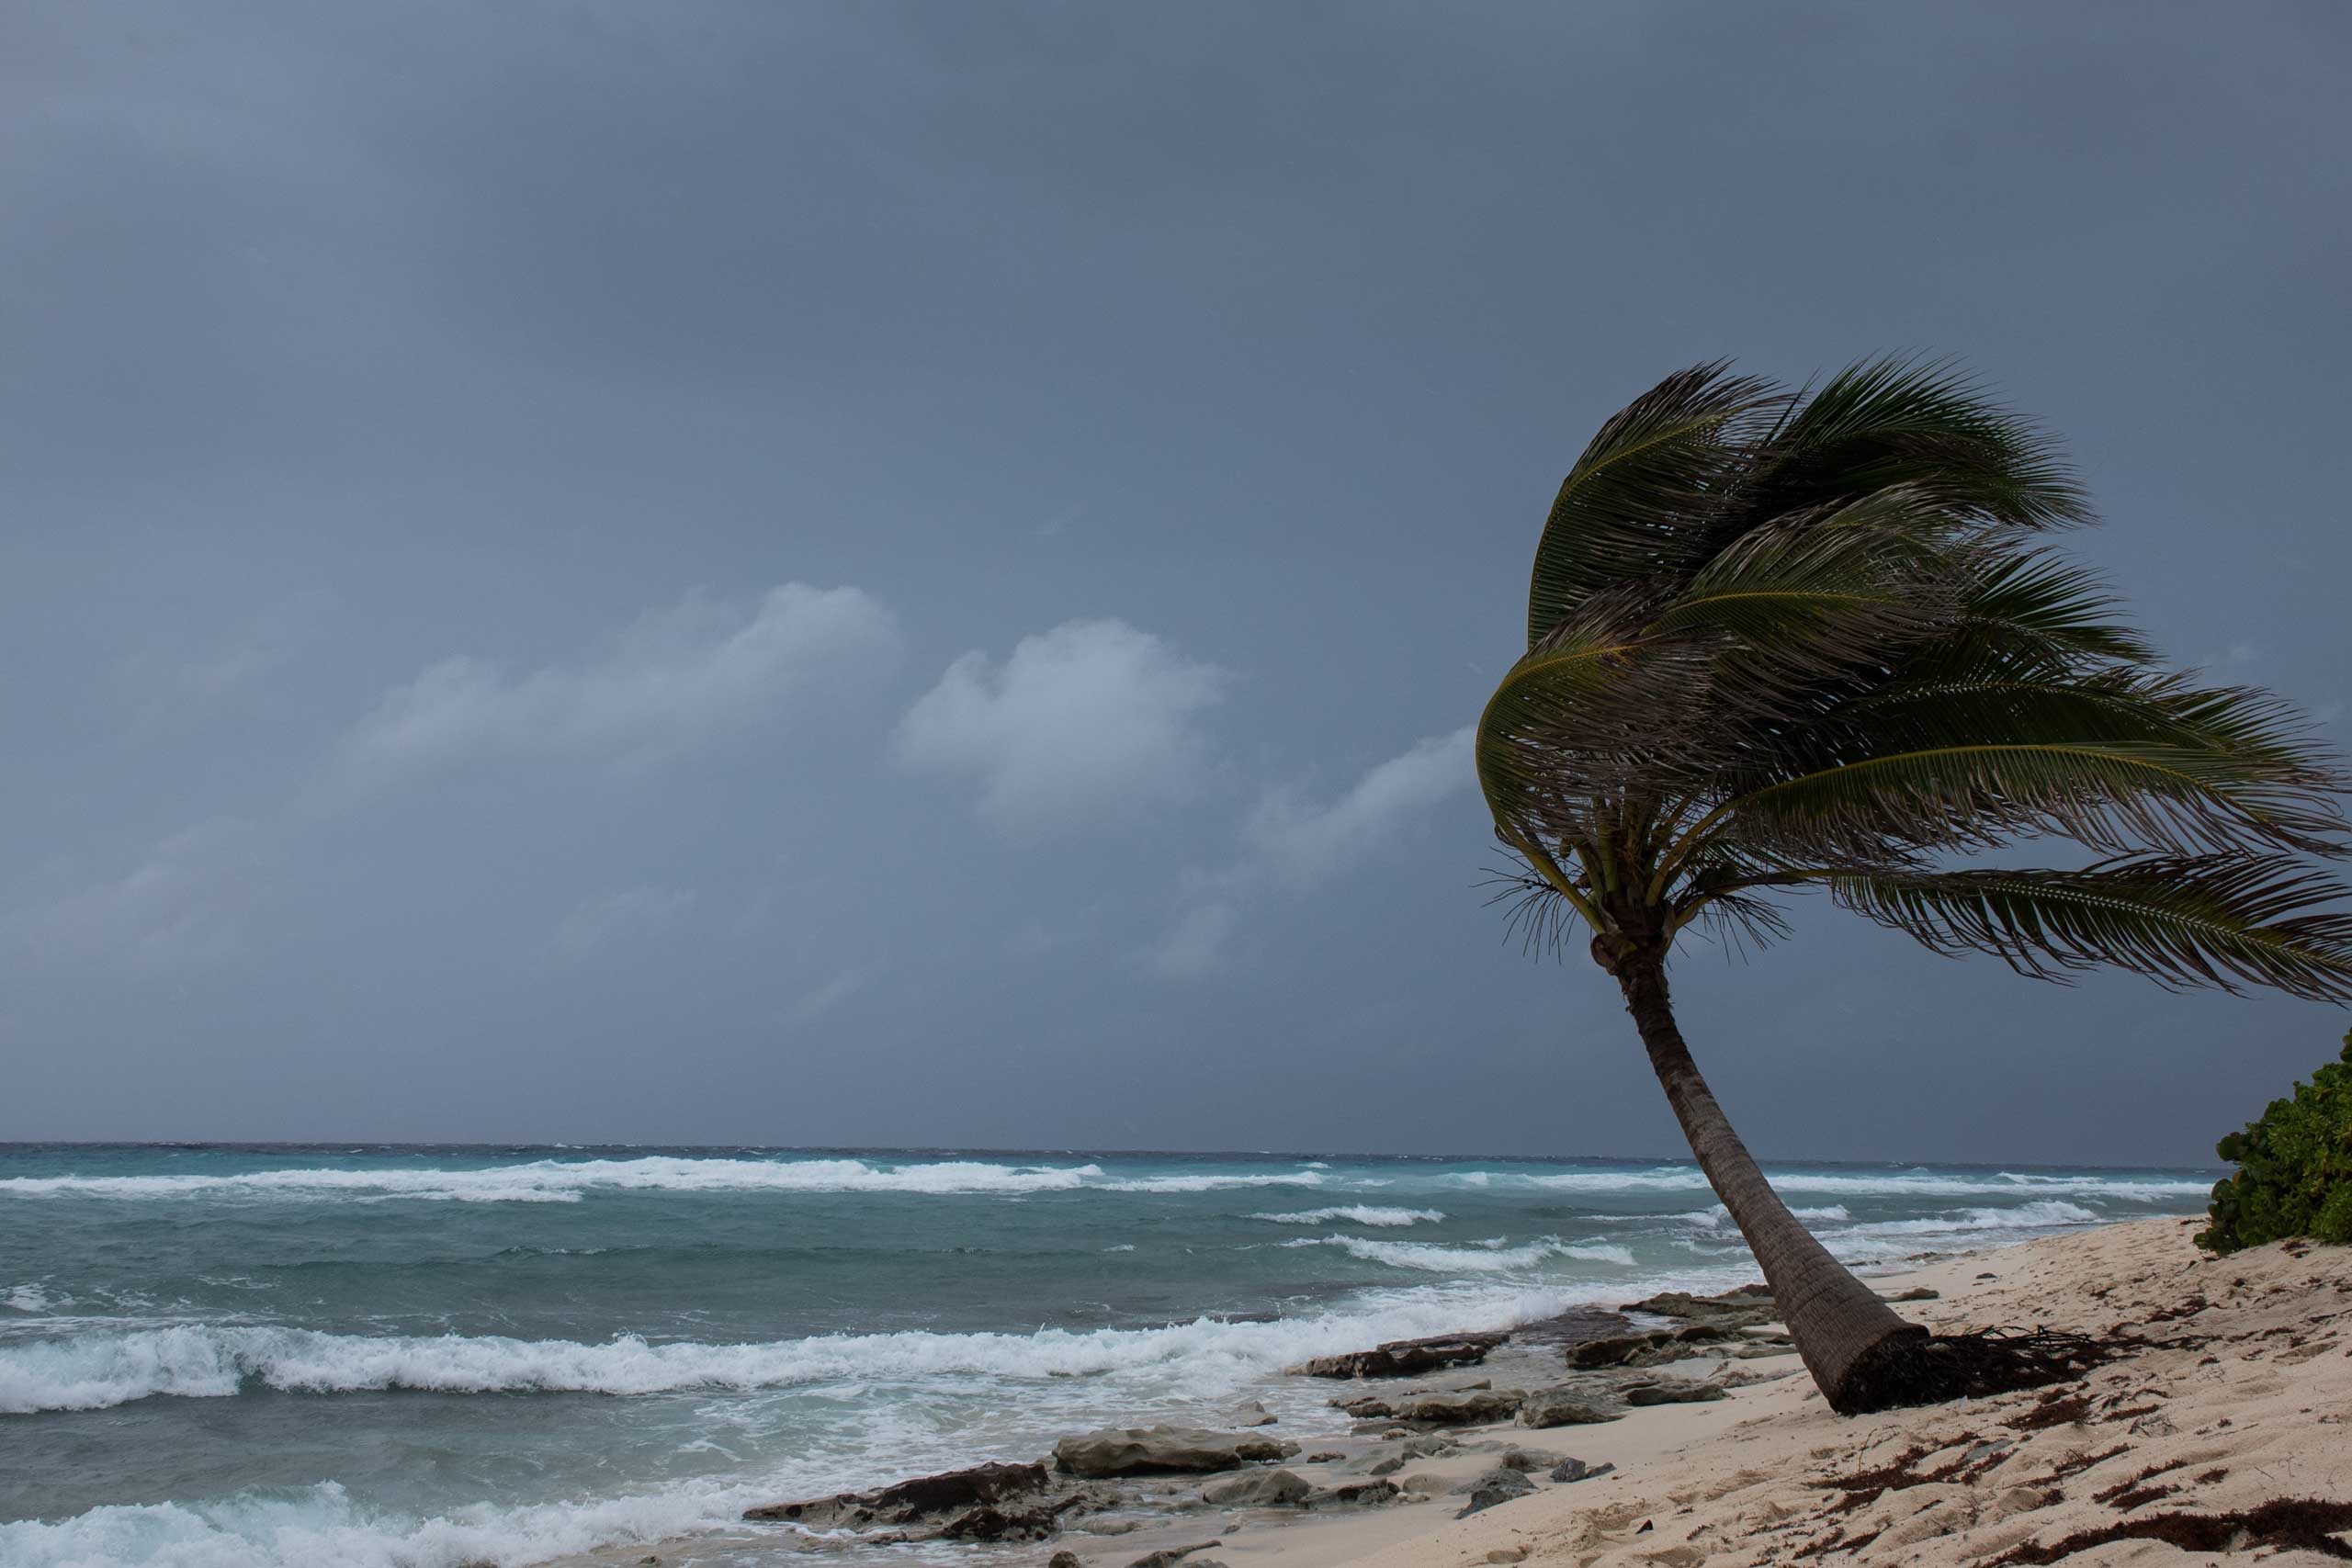 A palm tree getting blown around by a hurricane